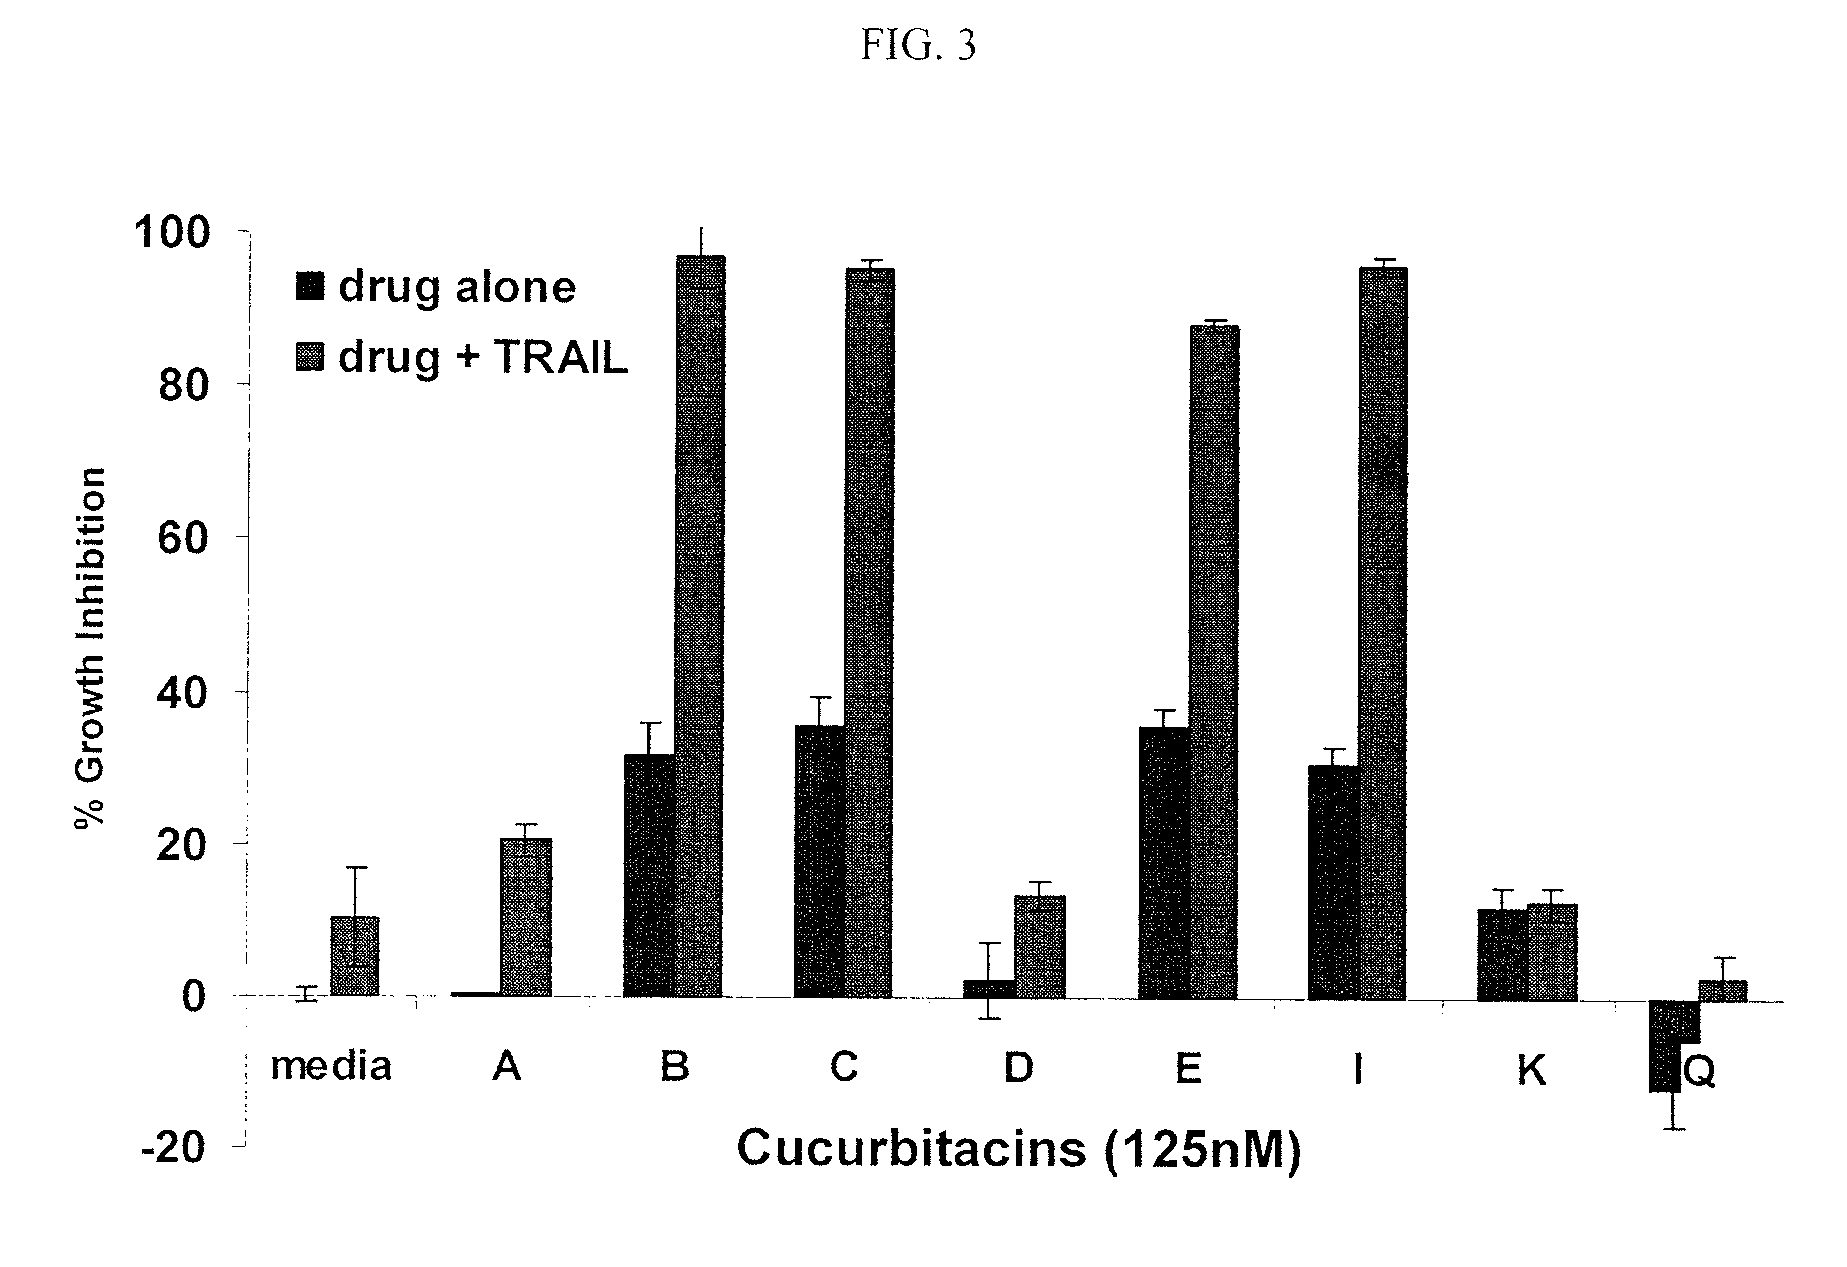 Method of sensitizing cancer cells to the cytotoxic effects of death receptor ligands in cancer treatment